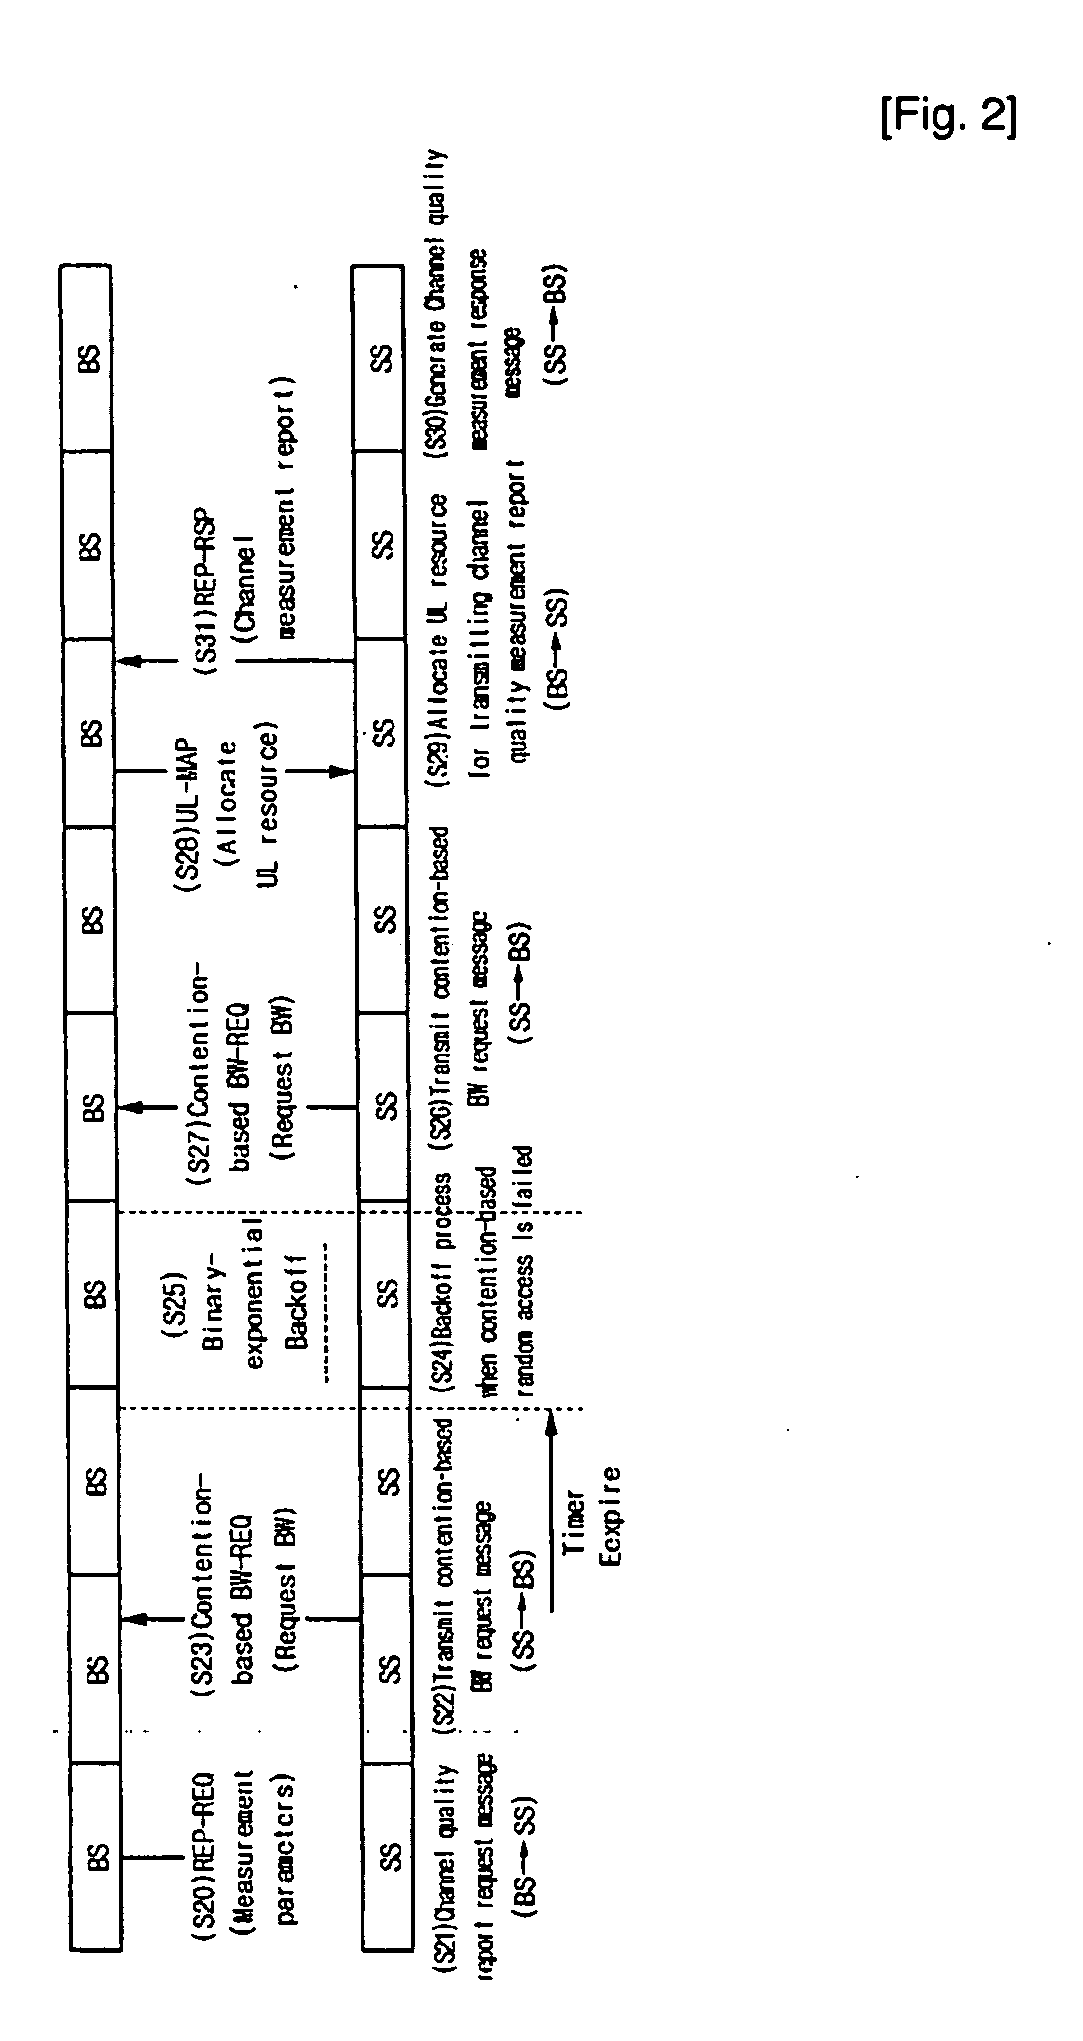 Method for Requesting and Reporting Channel Quality Information in Wireless System and Apparatus Thereof